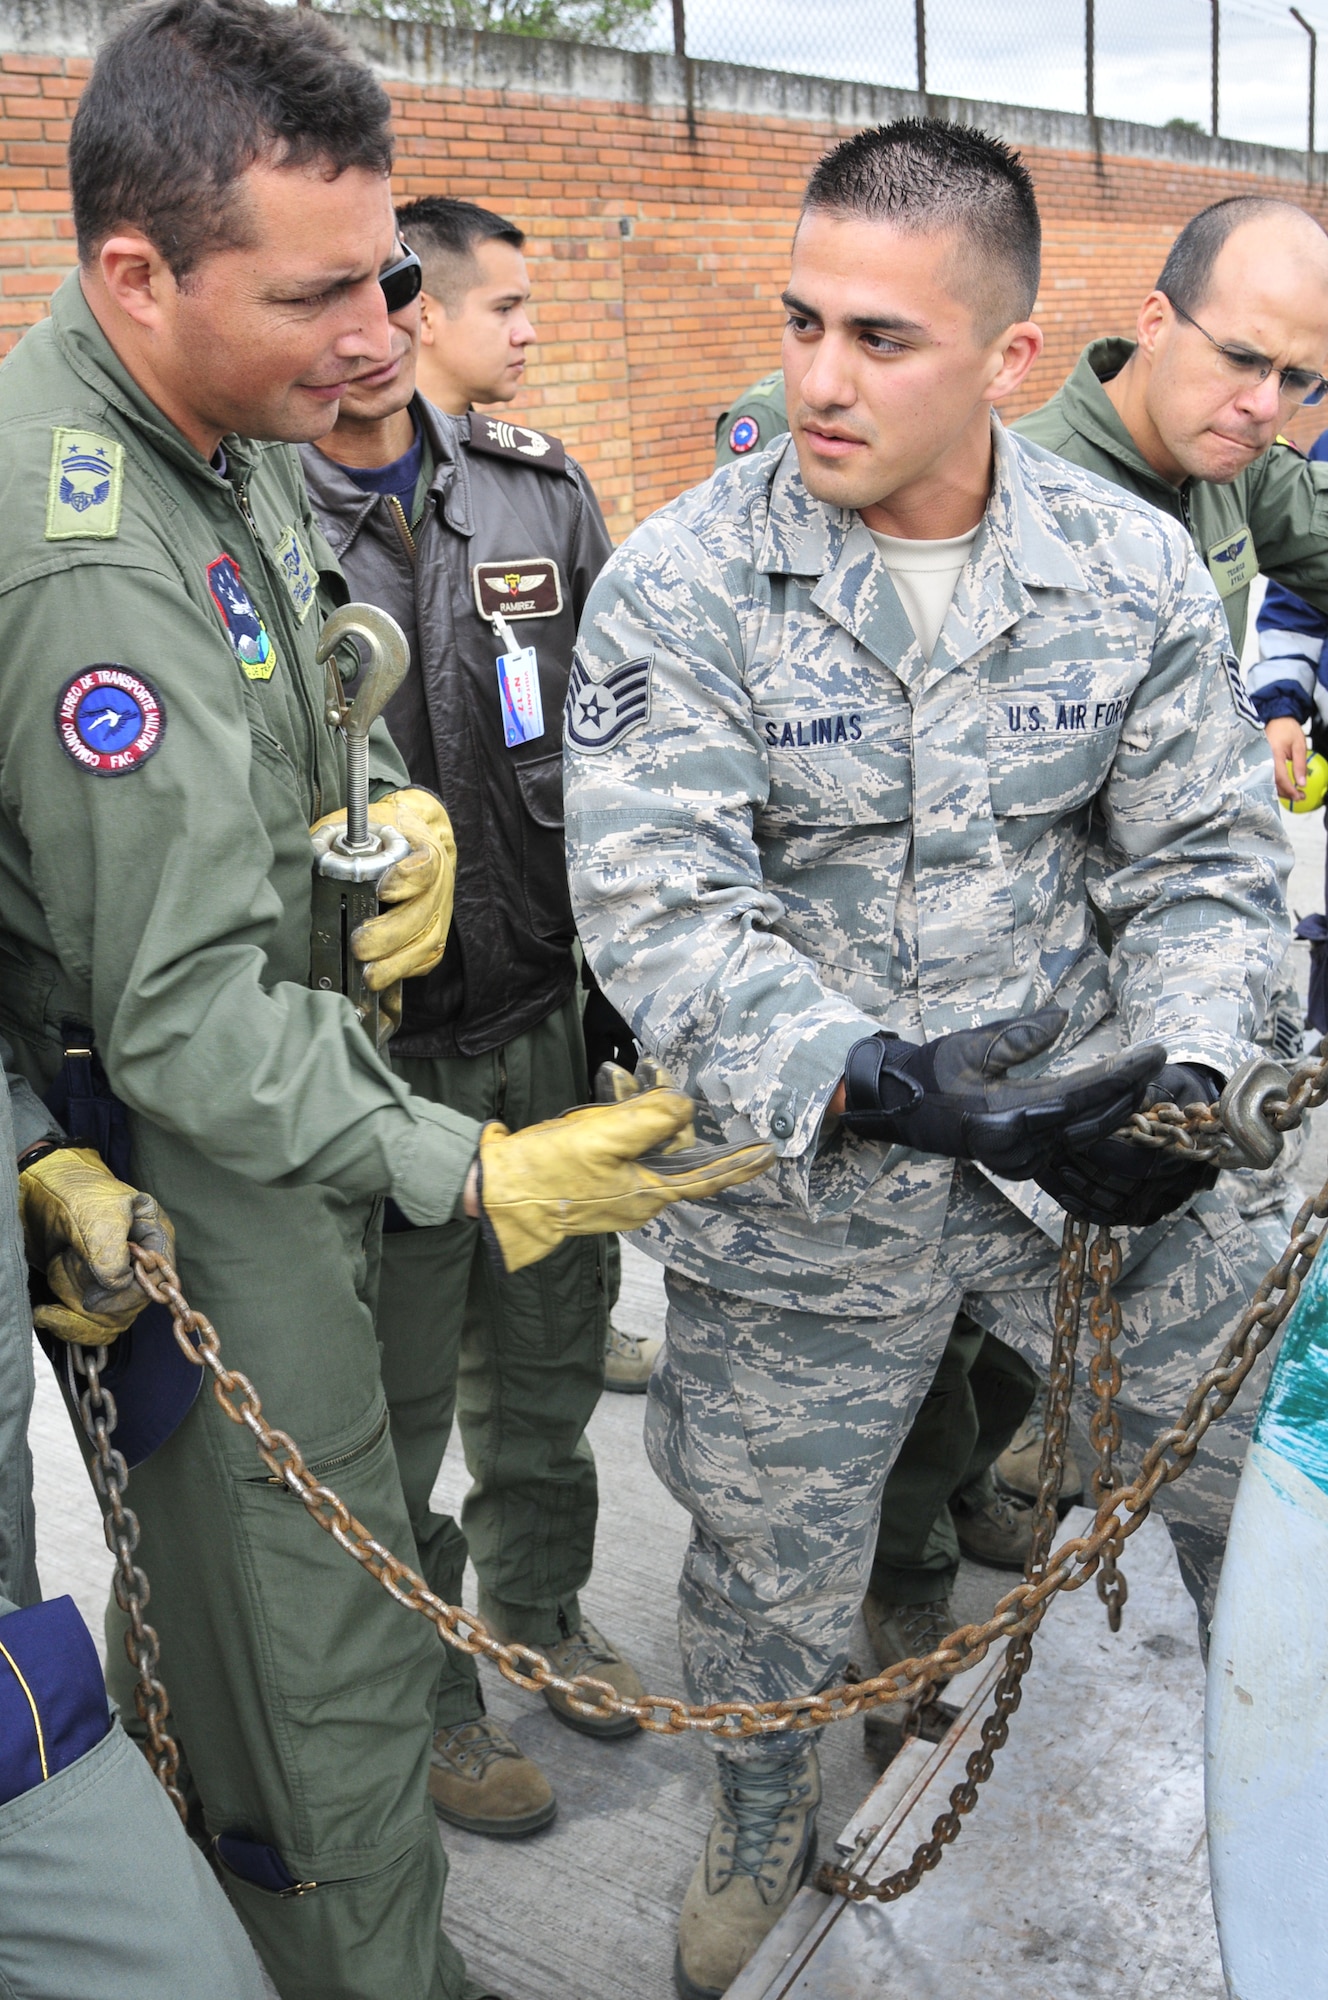 Staff Sgt. Peter Salinas, 571st Mobility Support Advisory Squadron air transportation air advisor, explains to Técnico Subjefe Hector Sierra, Colombian air force, how to properly connect chains to build a chain bridle during the final day of the equipment preparation seminar June 8 at Commando Aéreo de Transporte Militar, Bogota, Colombia.  Chains are used on heavy single items, whereas nets are used for bulk cargo.  (U.S. Air Force photo by Tech. Sgt. Lesley Waters)